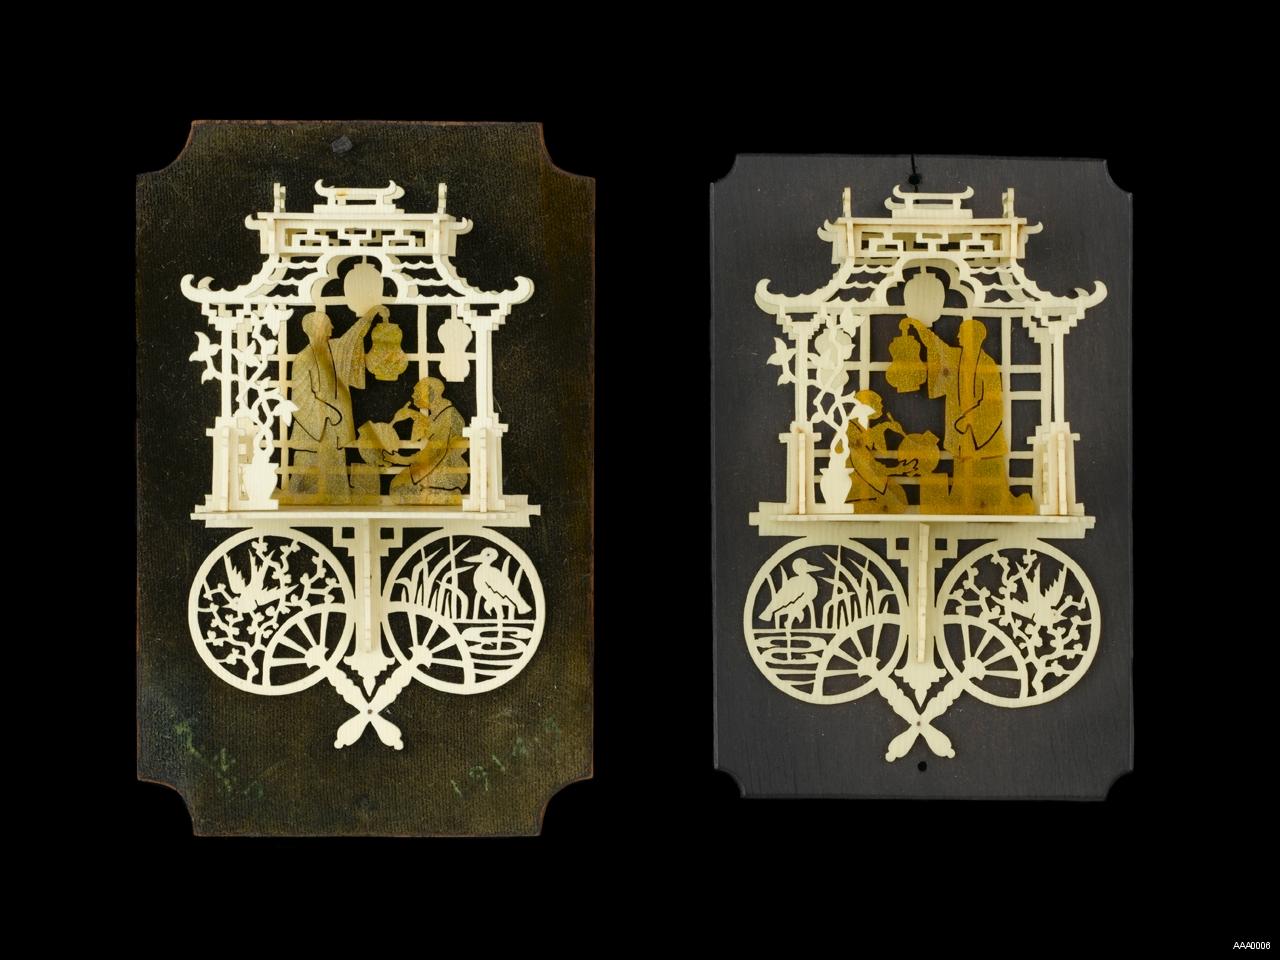 A pair of bonework plaques depicting fretwork Chinese pavilions. Two figures are hanging up lanterns inside each pavilion and beneath are two crossed fans depicting a heron and a bluebird.